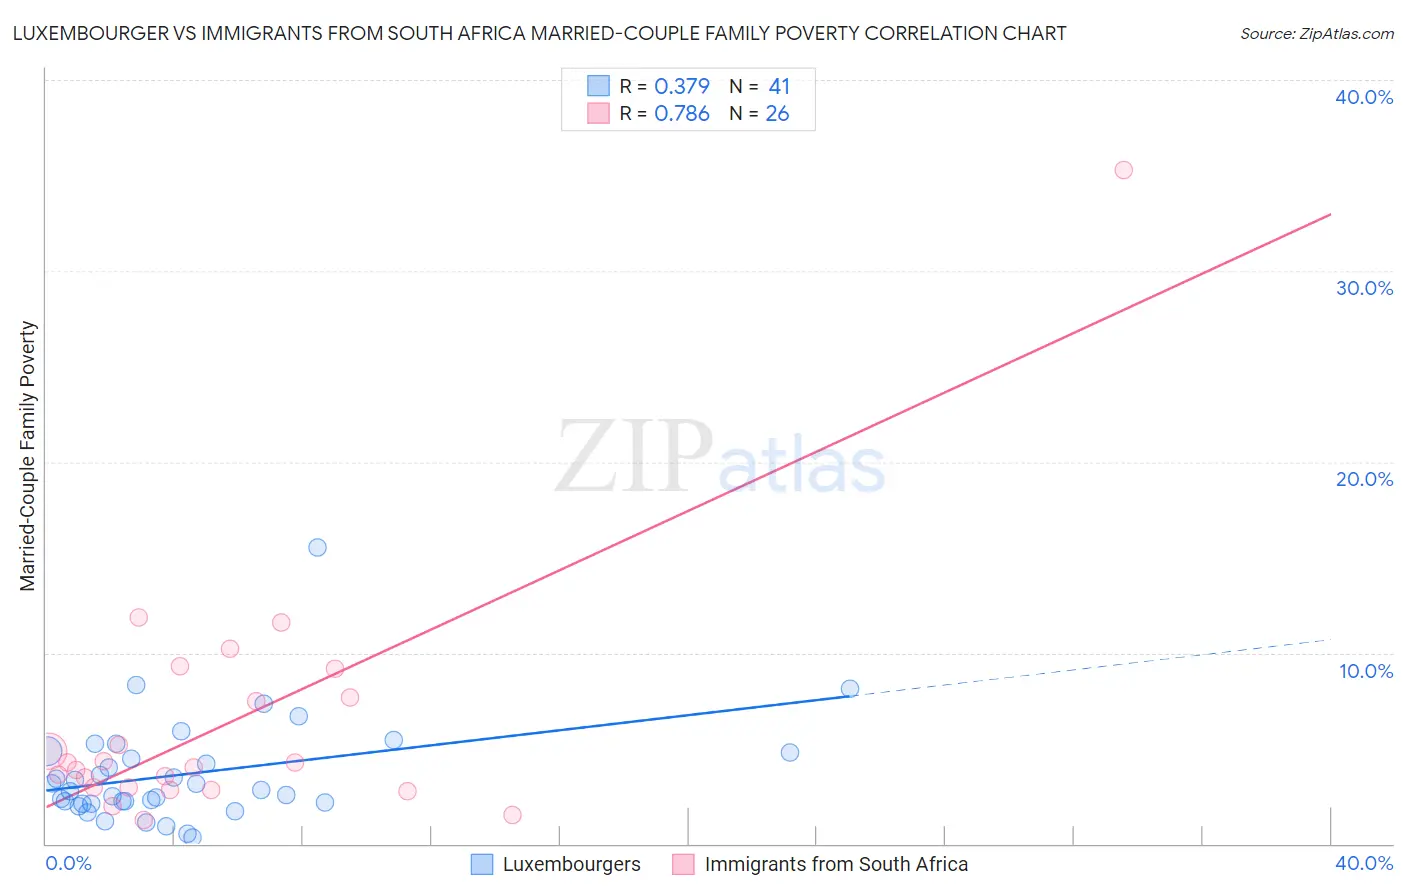 Luxembourger vs Immigrants from South Africa Married-Couple Family Poverty